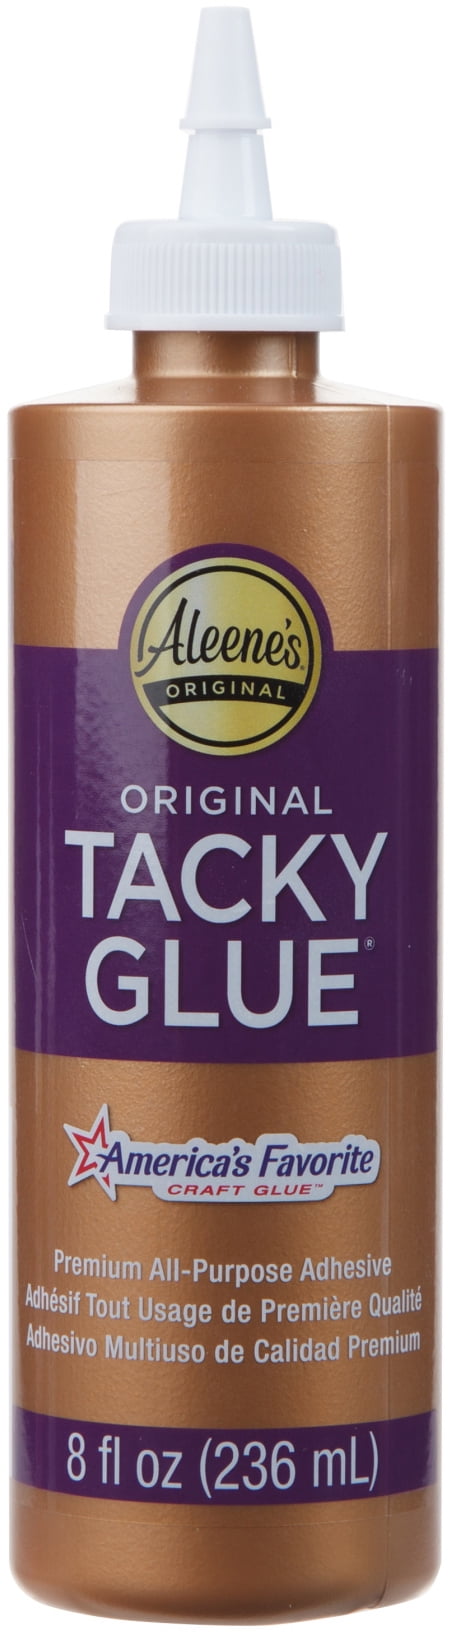 Aleene's Original Glues - Easy Recycle Project with Tacky Glue